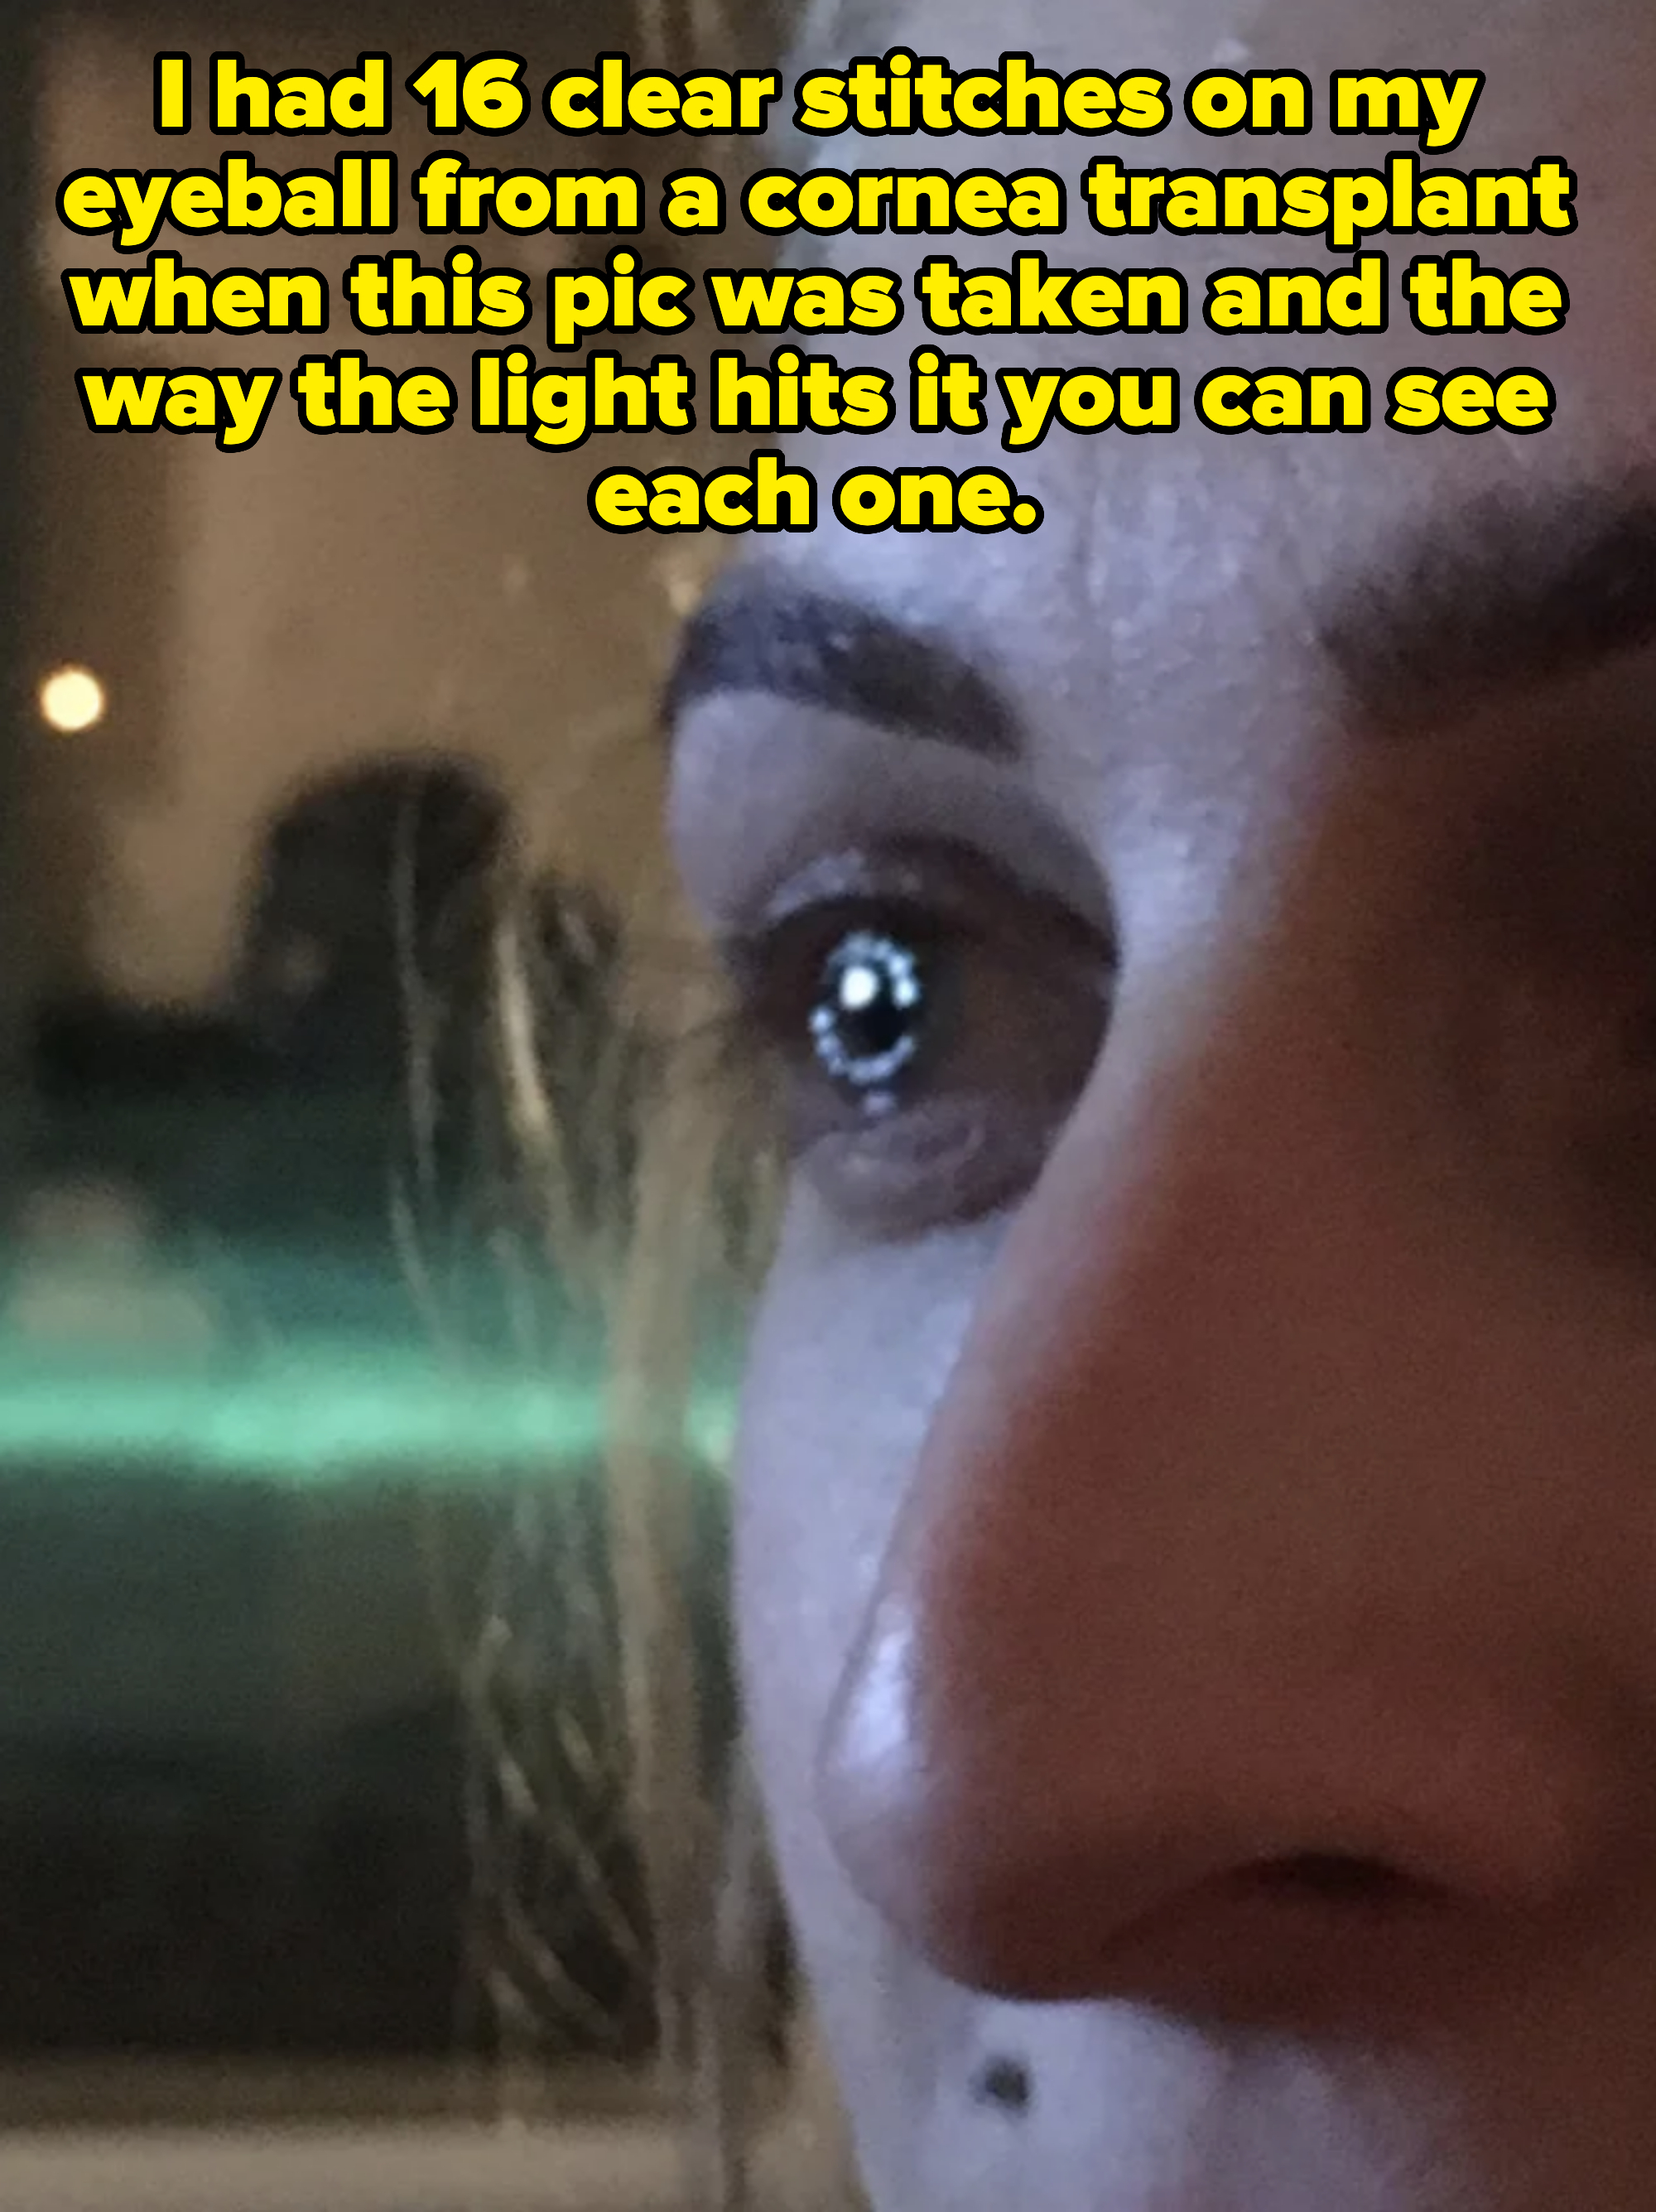 Close-up of a person&#x27;s eye and part of their nose, with a reflection of light visible in the eye